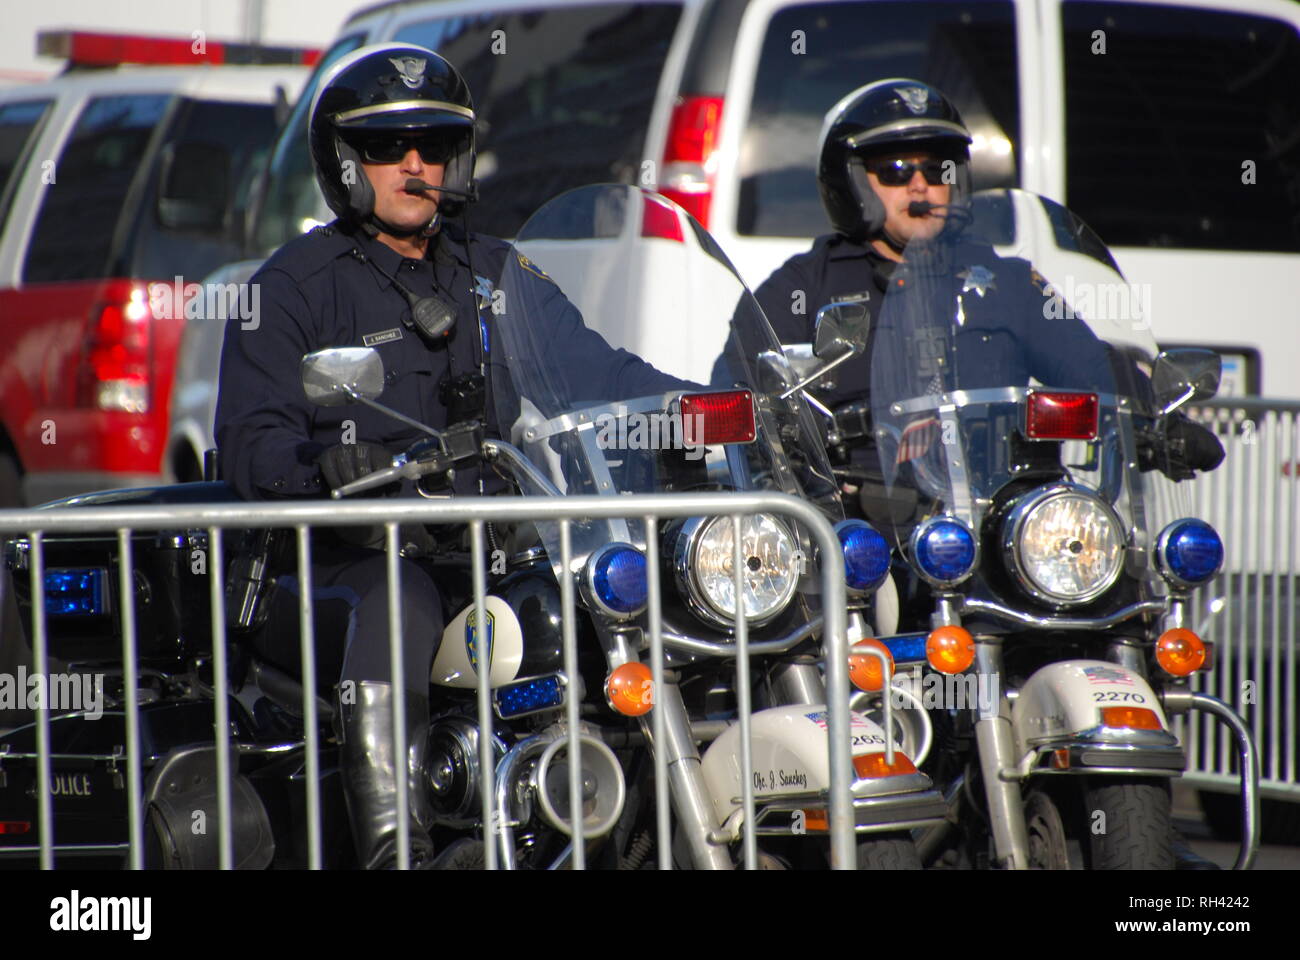 Oakland police Officer Jerry Sanchez and another officer patrol on motorcycle outside a Kamala Harris for President rally in downtown Oakland on Jan. 27, 2019. Stock Photo